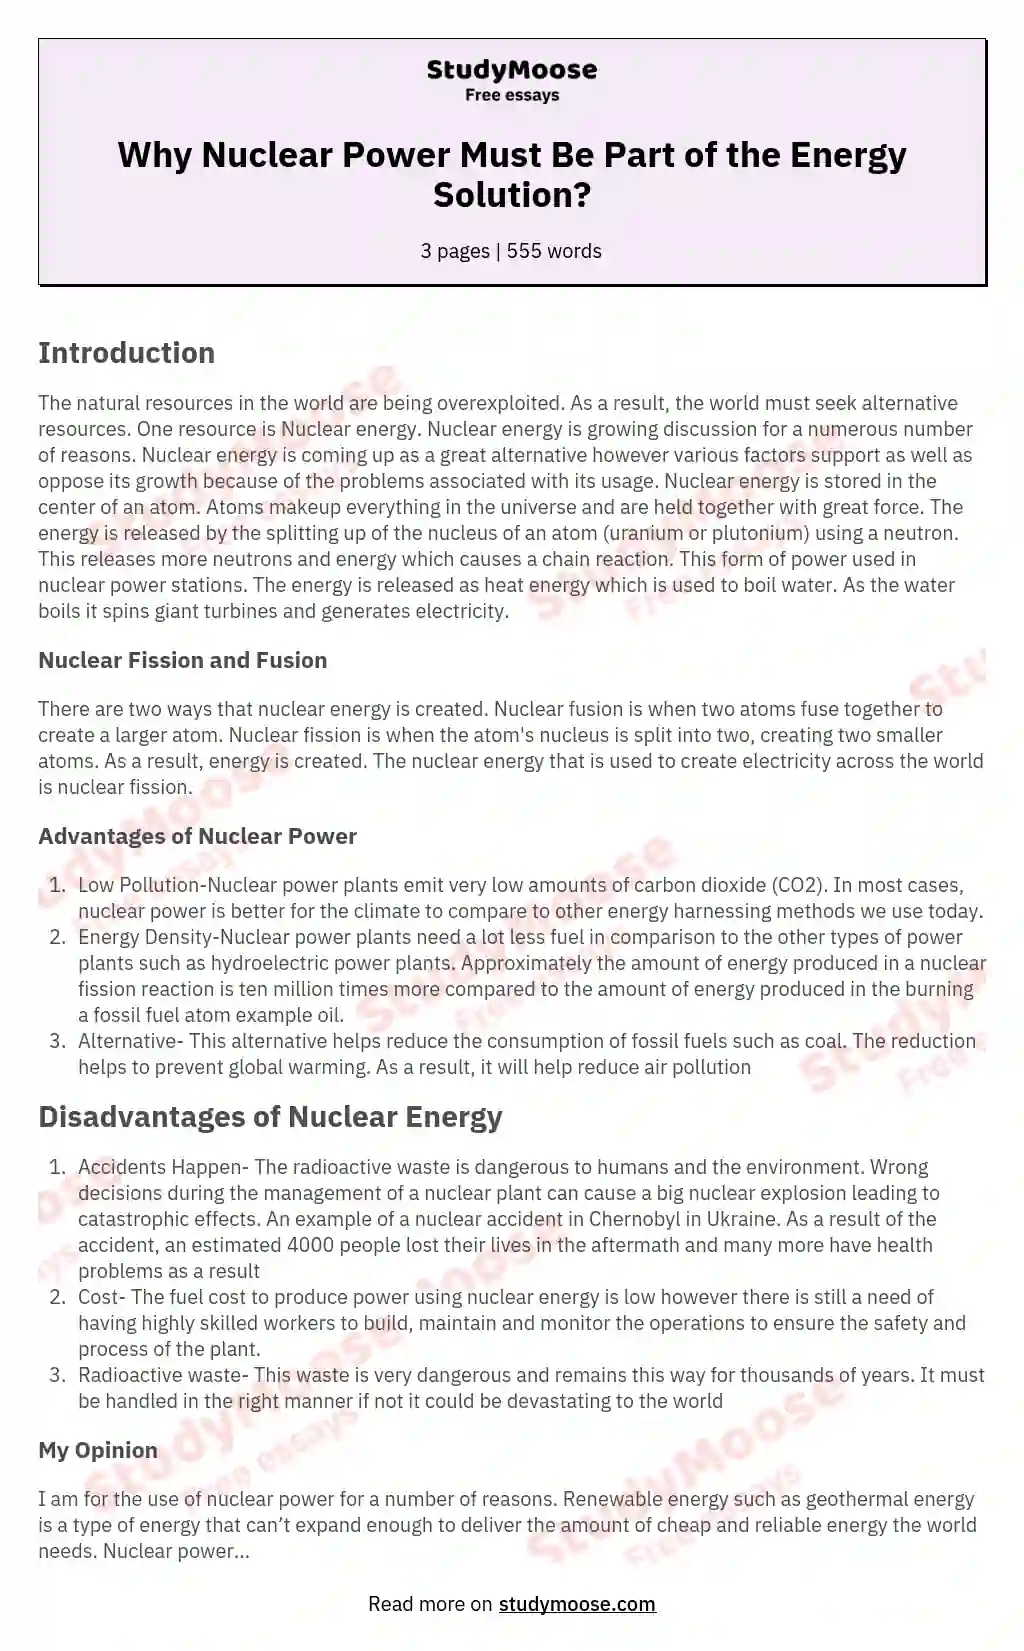 Why Nuclear Power Must Be Part of the Energy Solution?